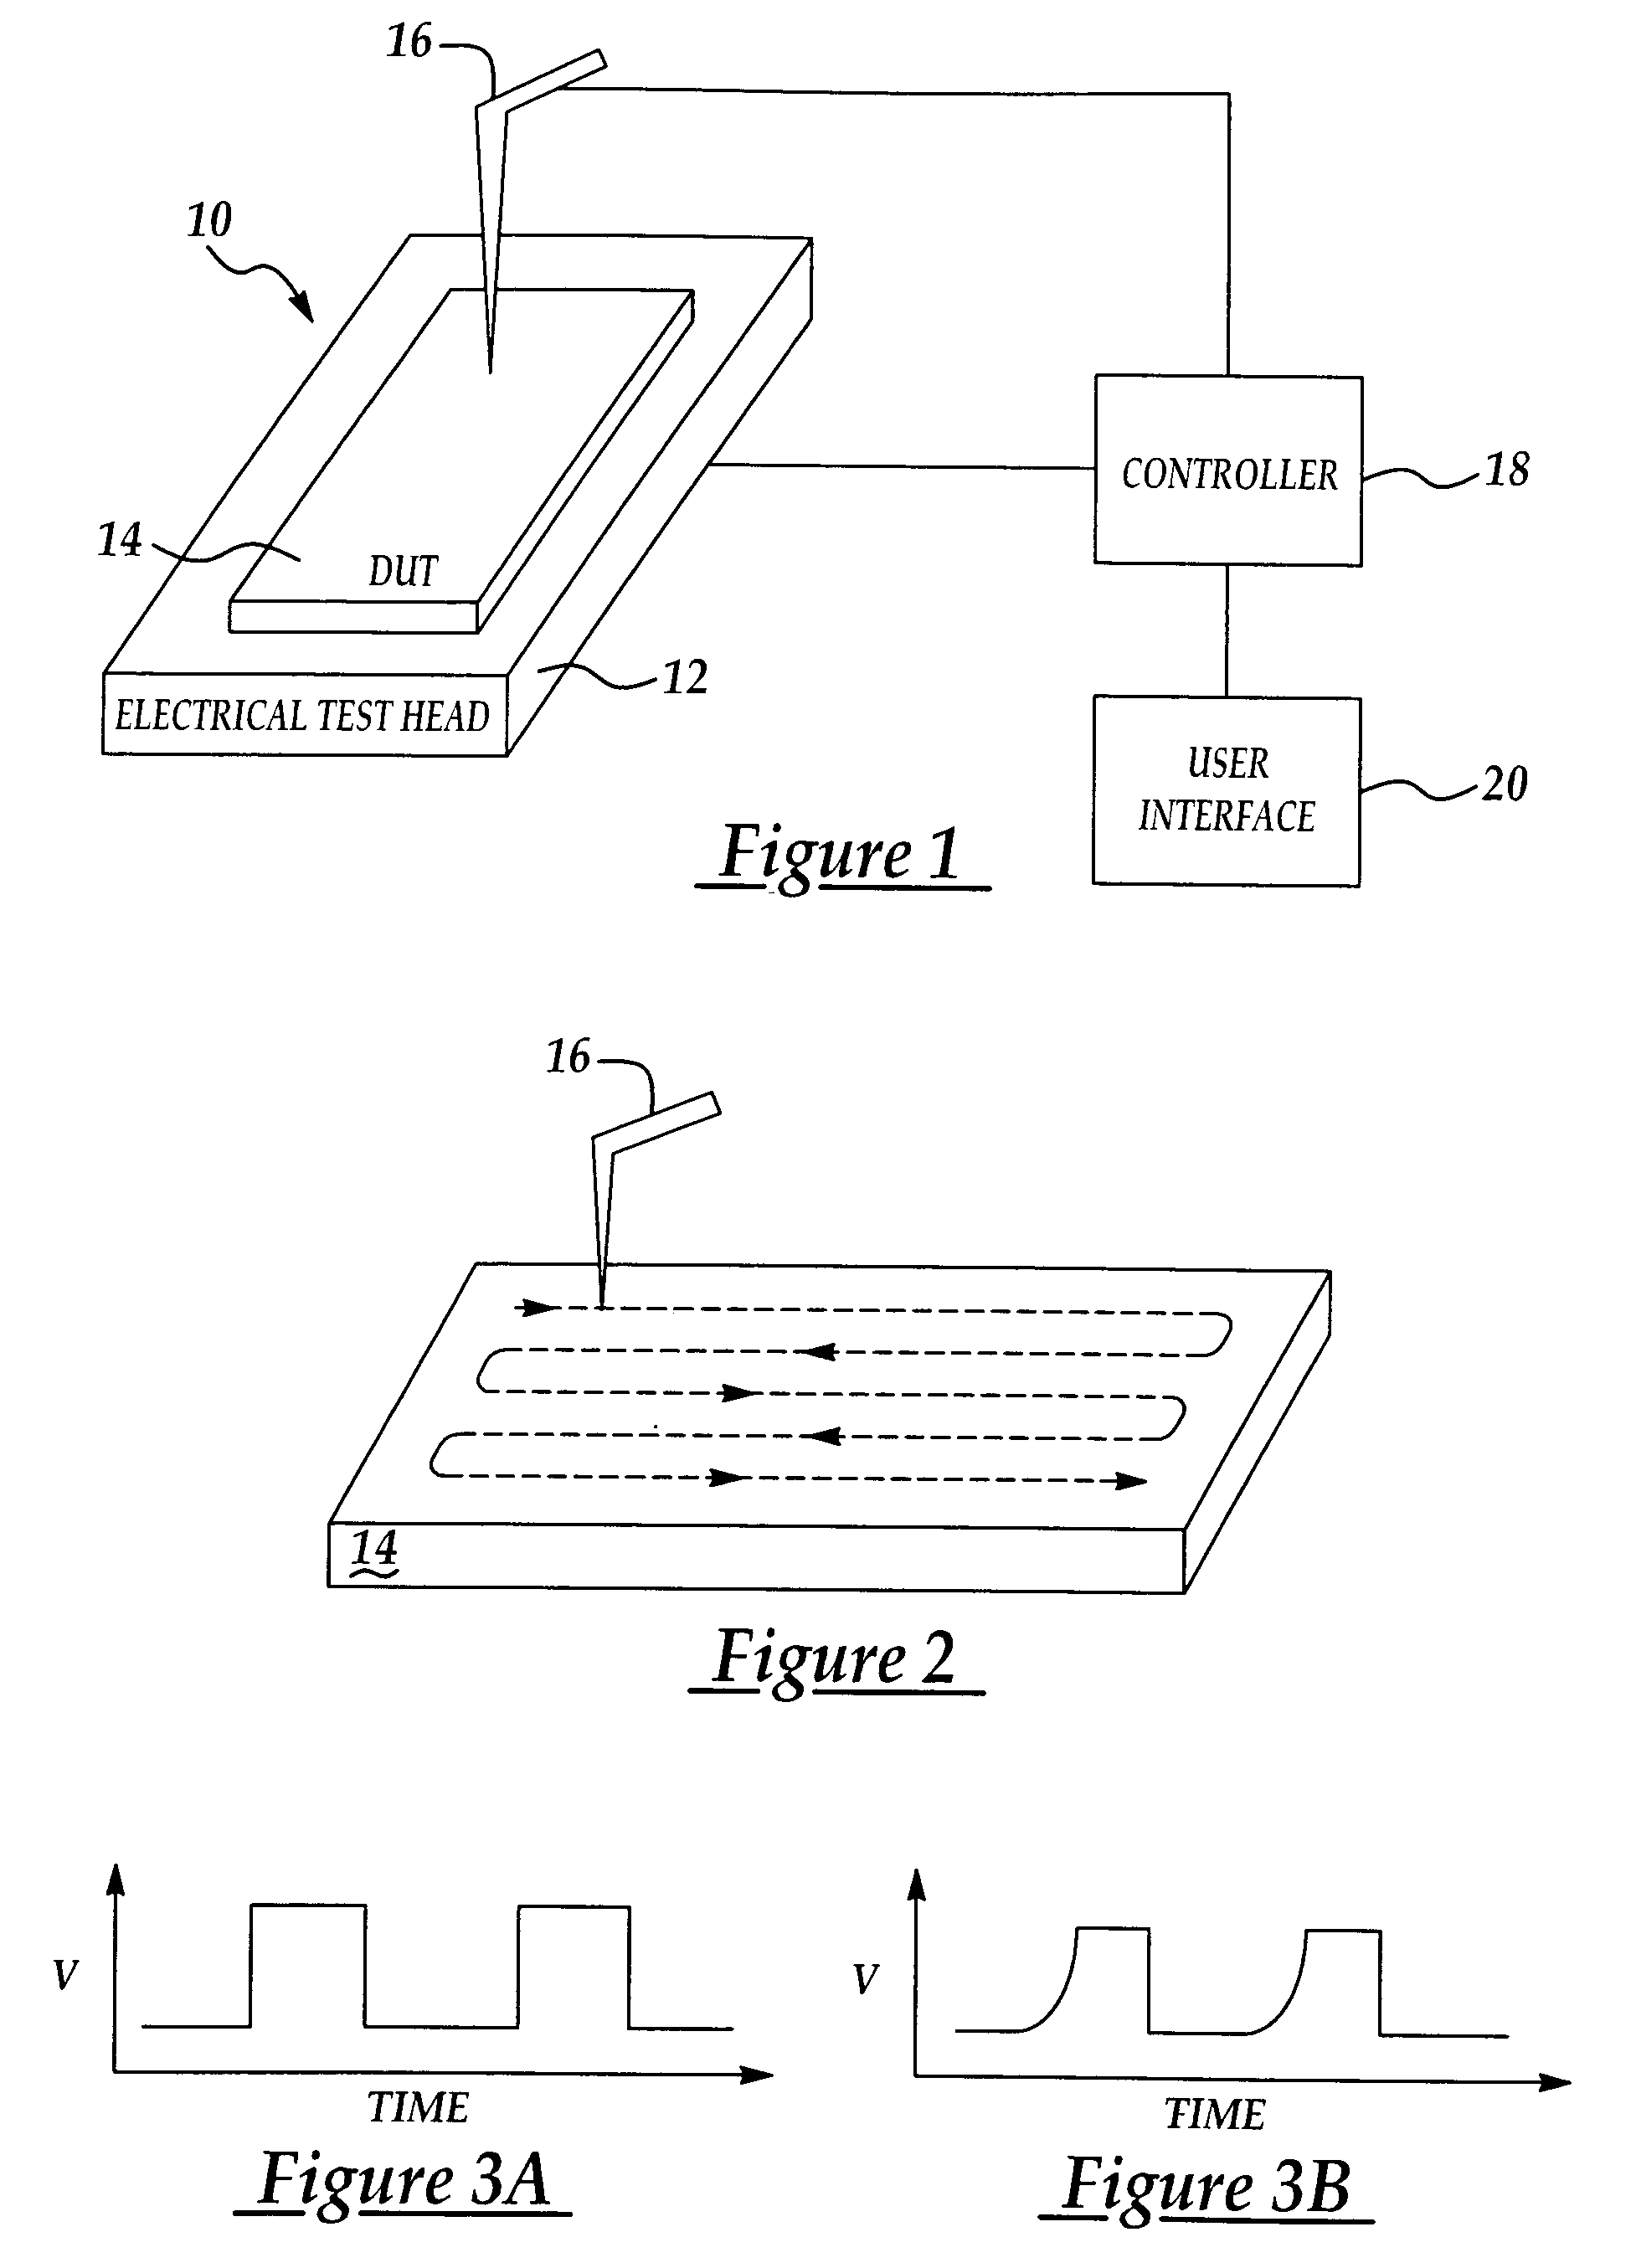 Electrical bias electrical test apparatus and method